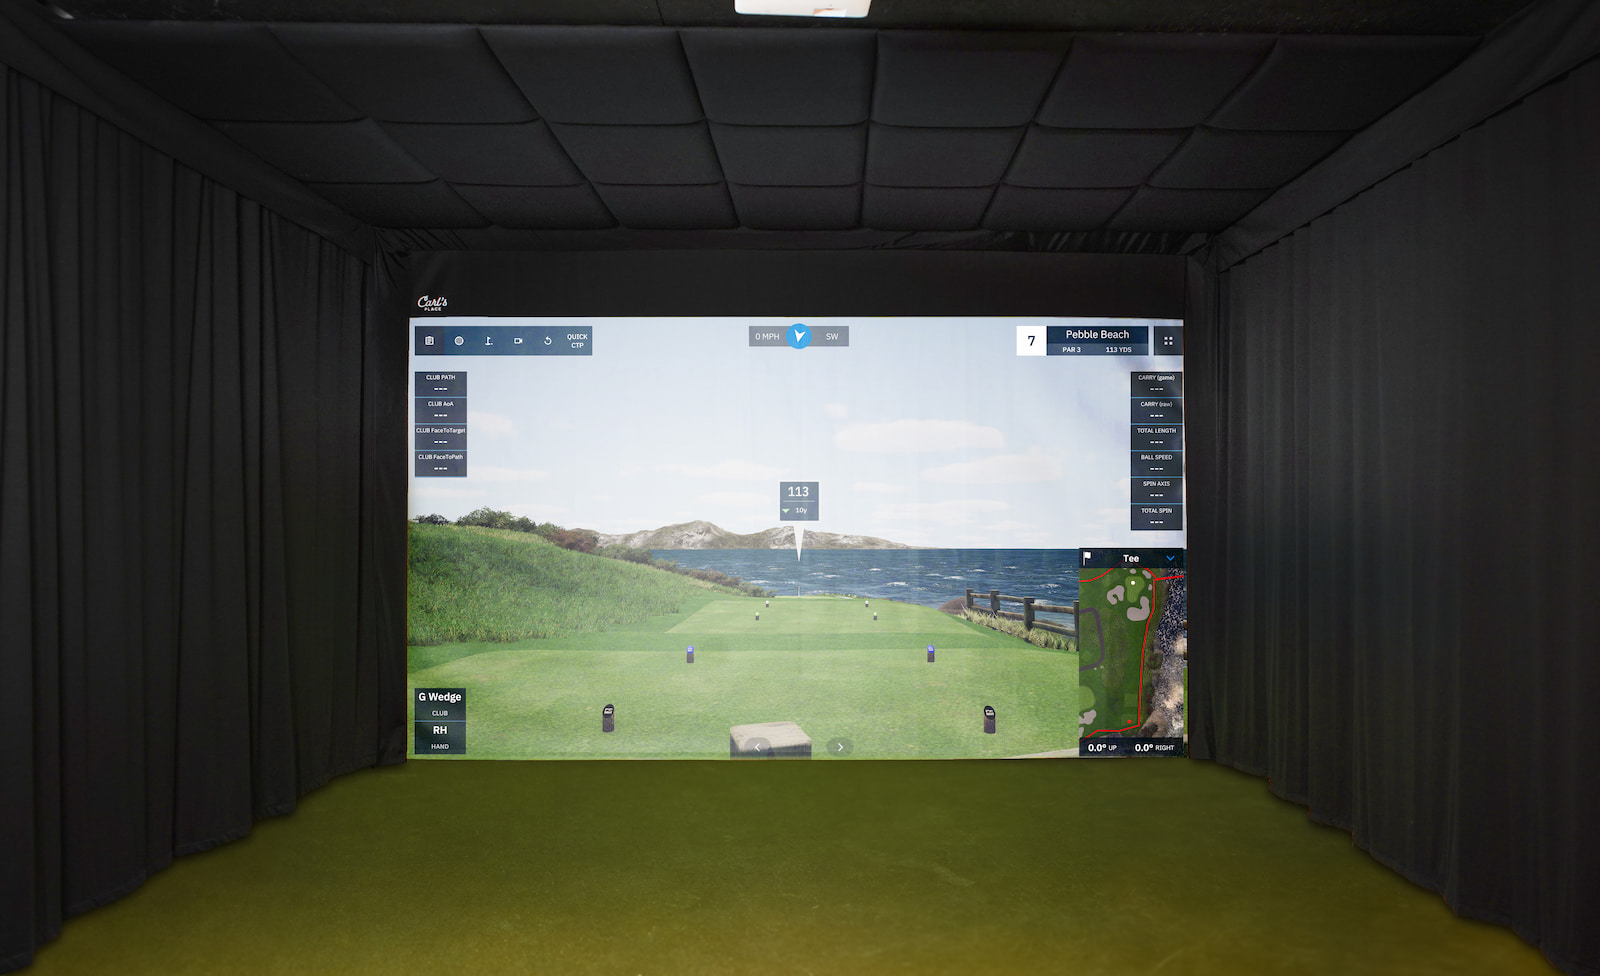 Built-In Golf Room in Basement with Curtains